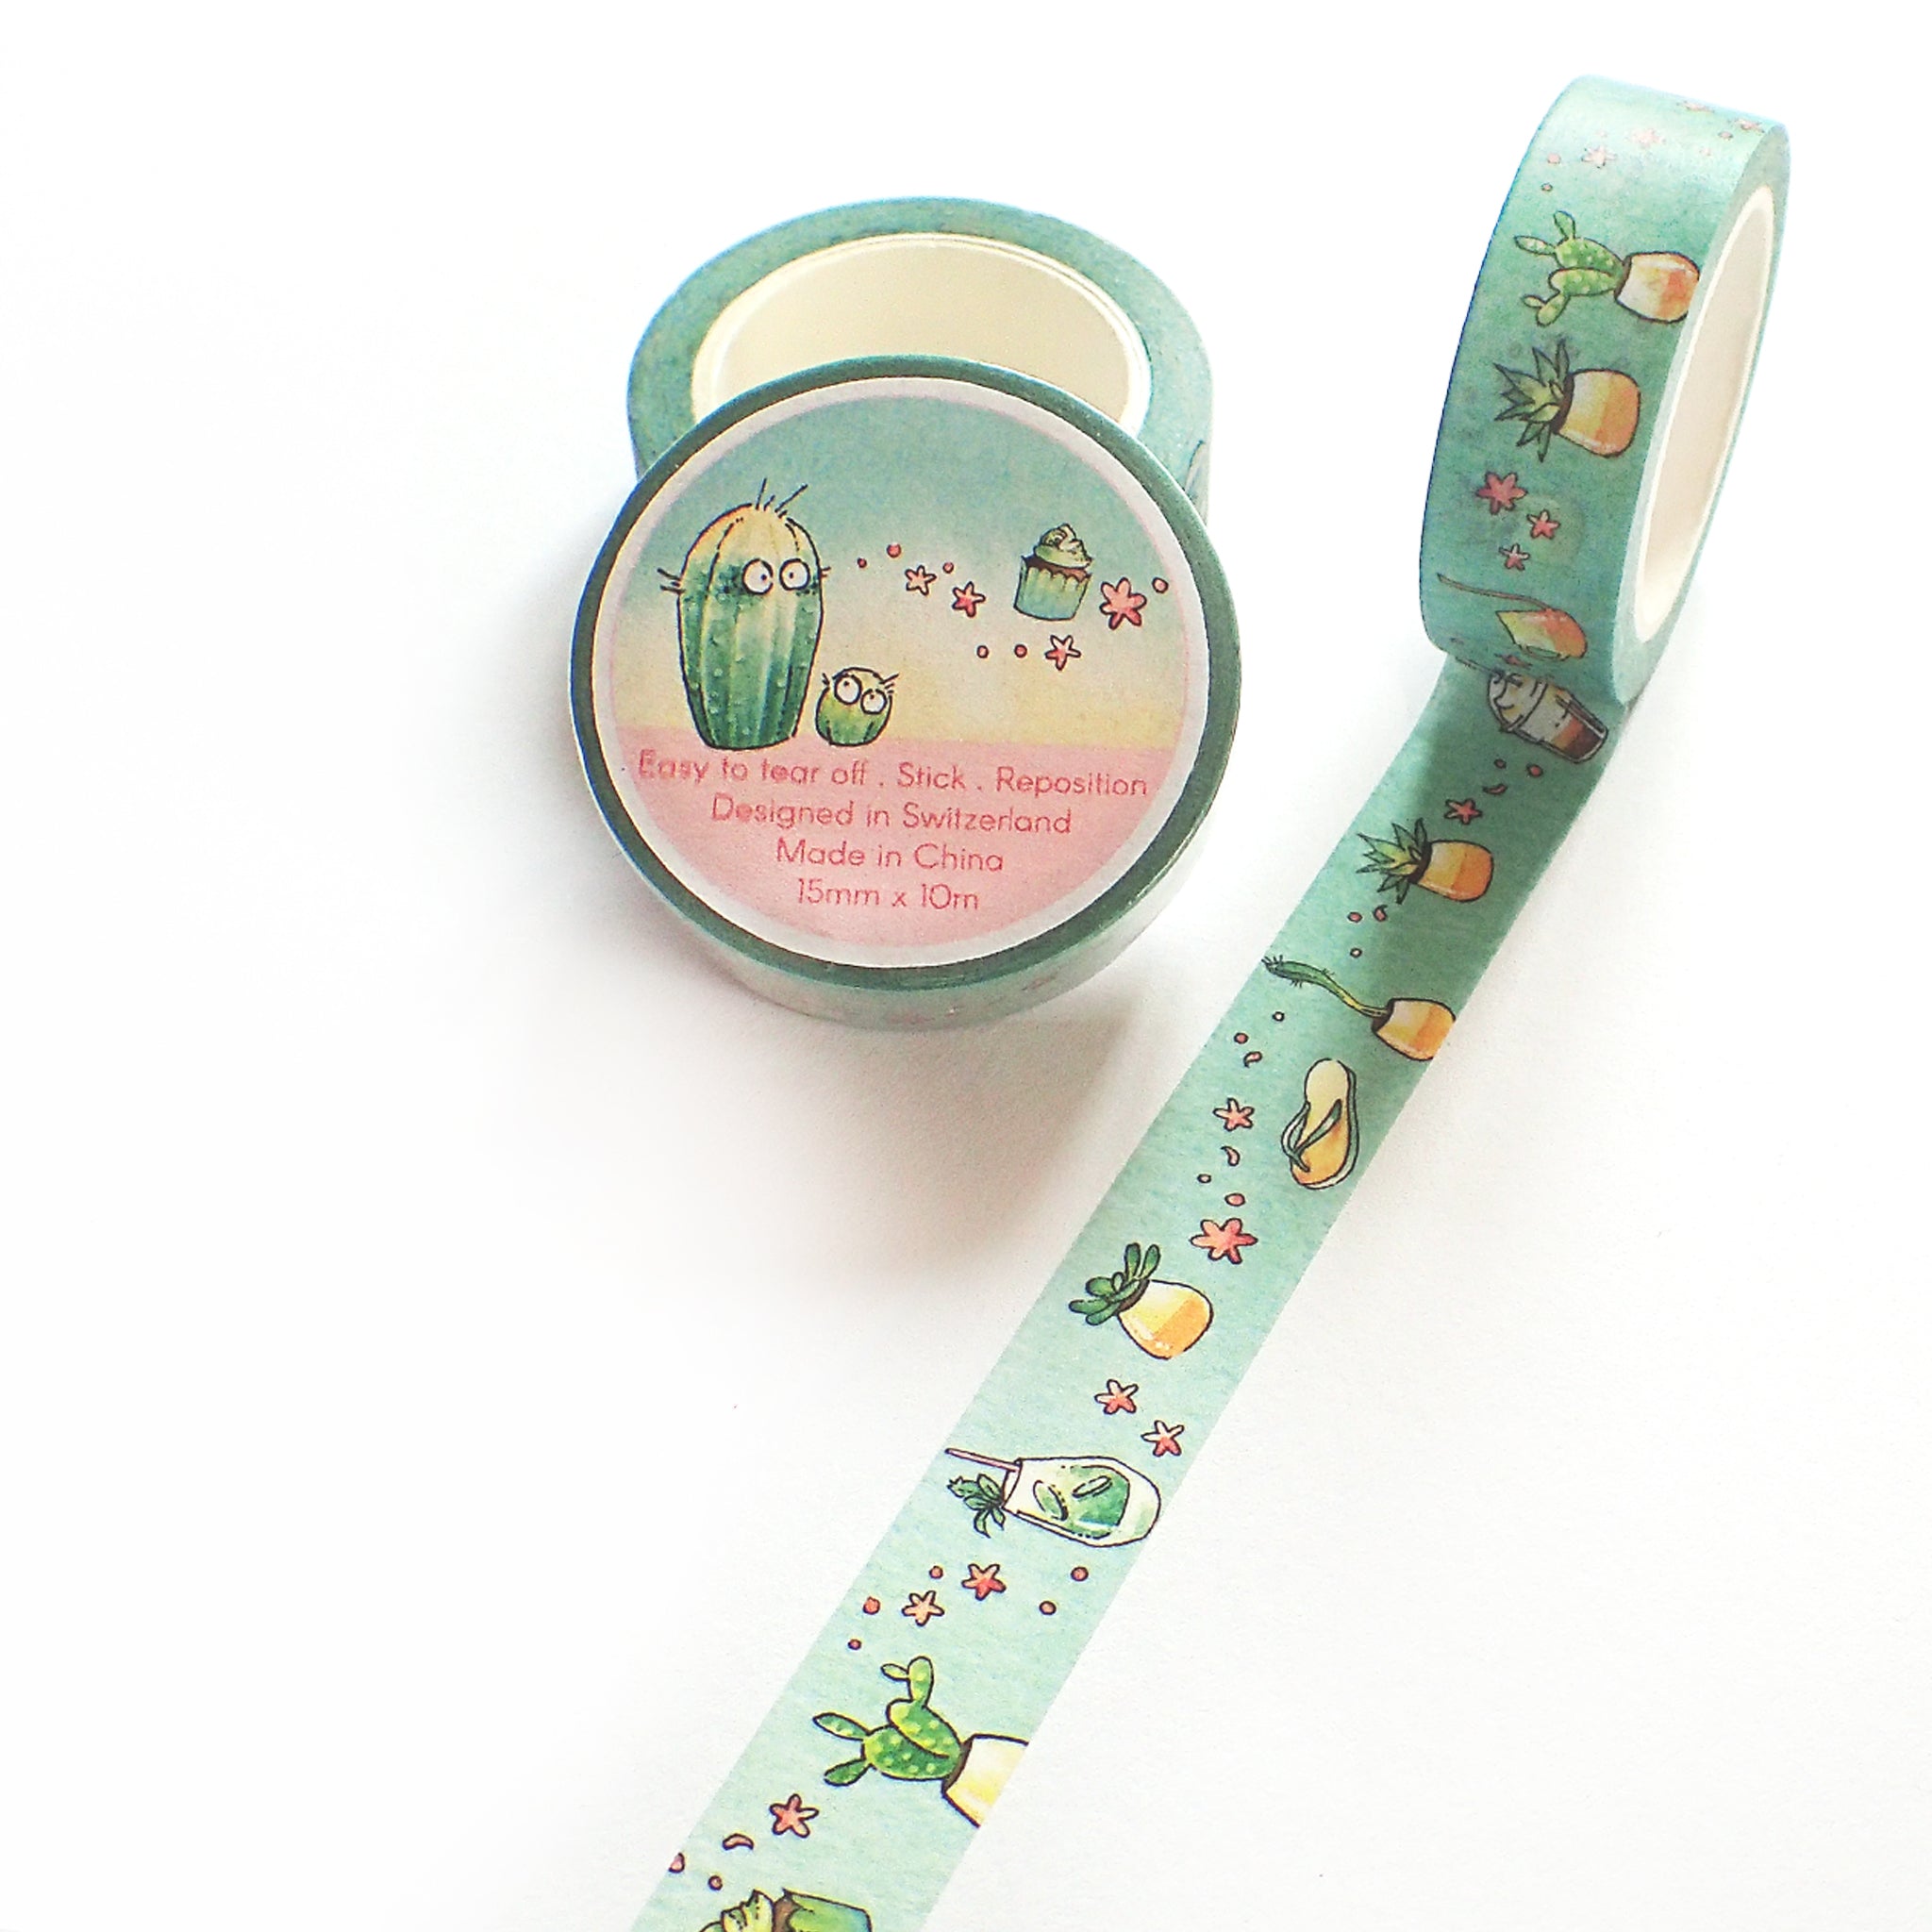 Playing In The Sand - 15mm Washi Tape - Cactus and Succulents Turquoise